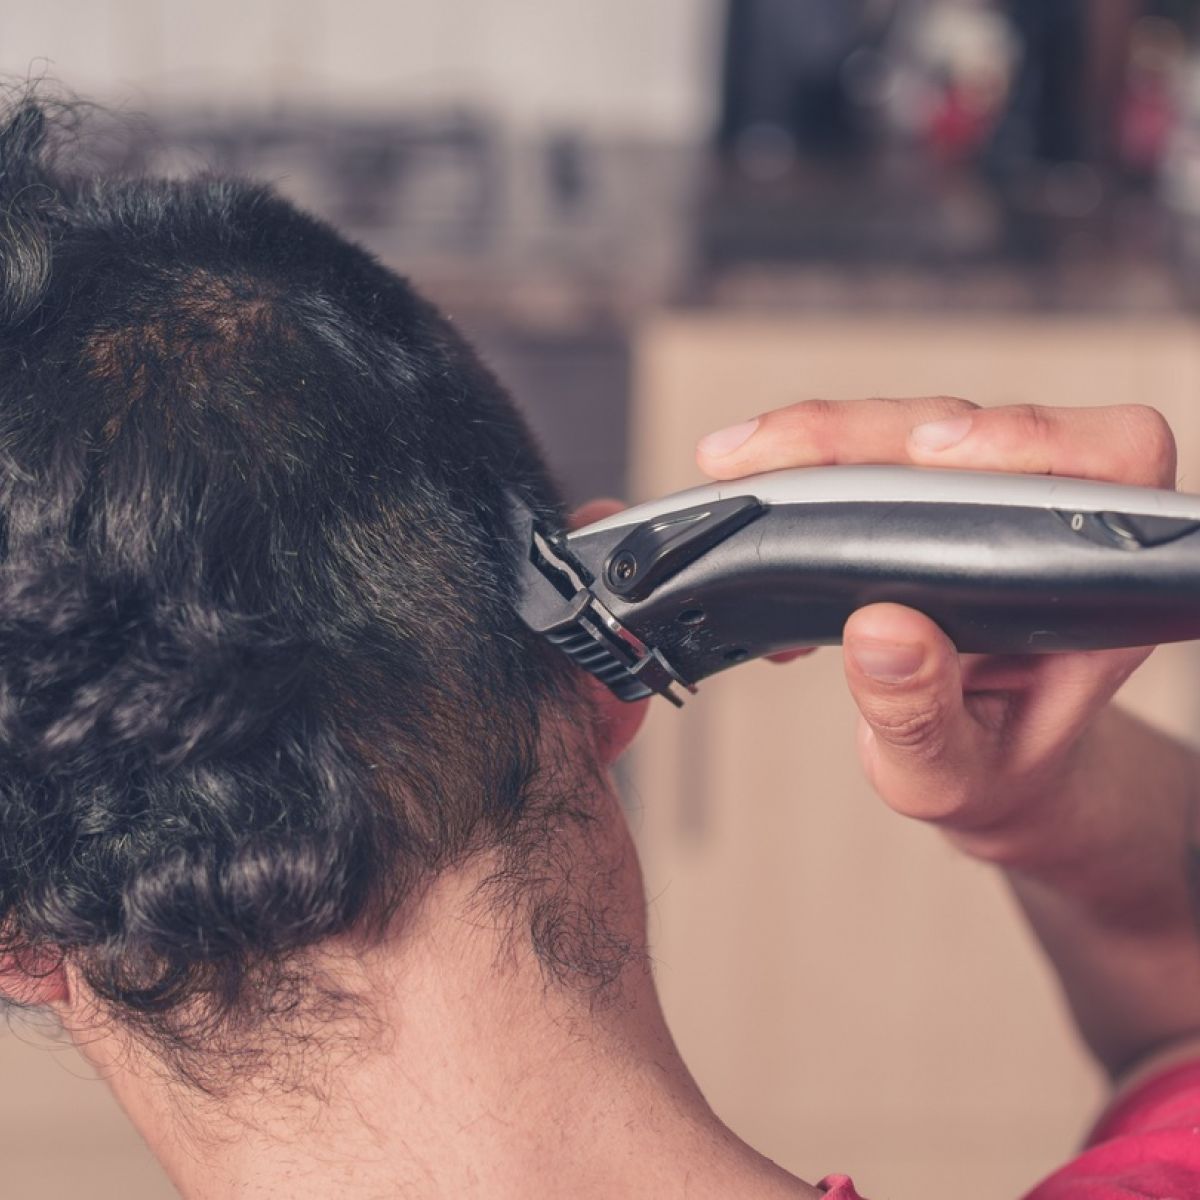 how to use clippers to cut own hair